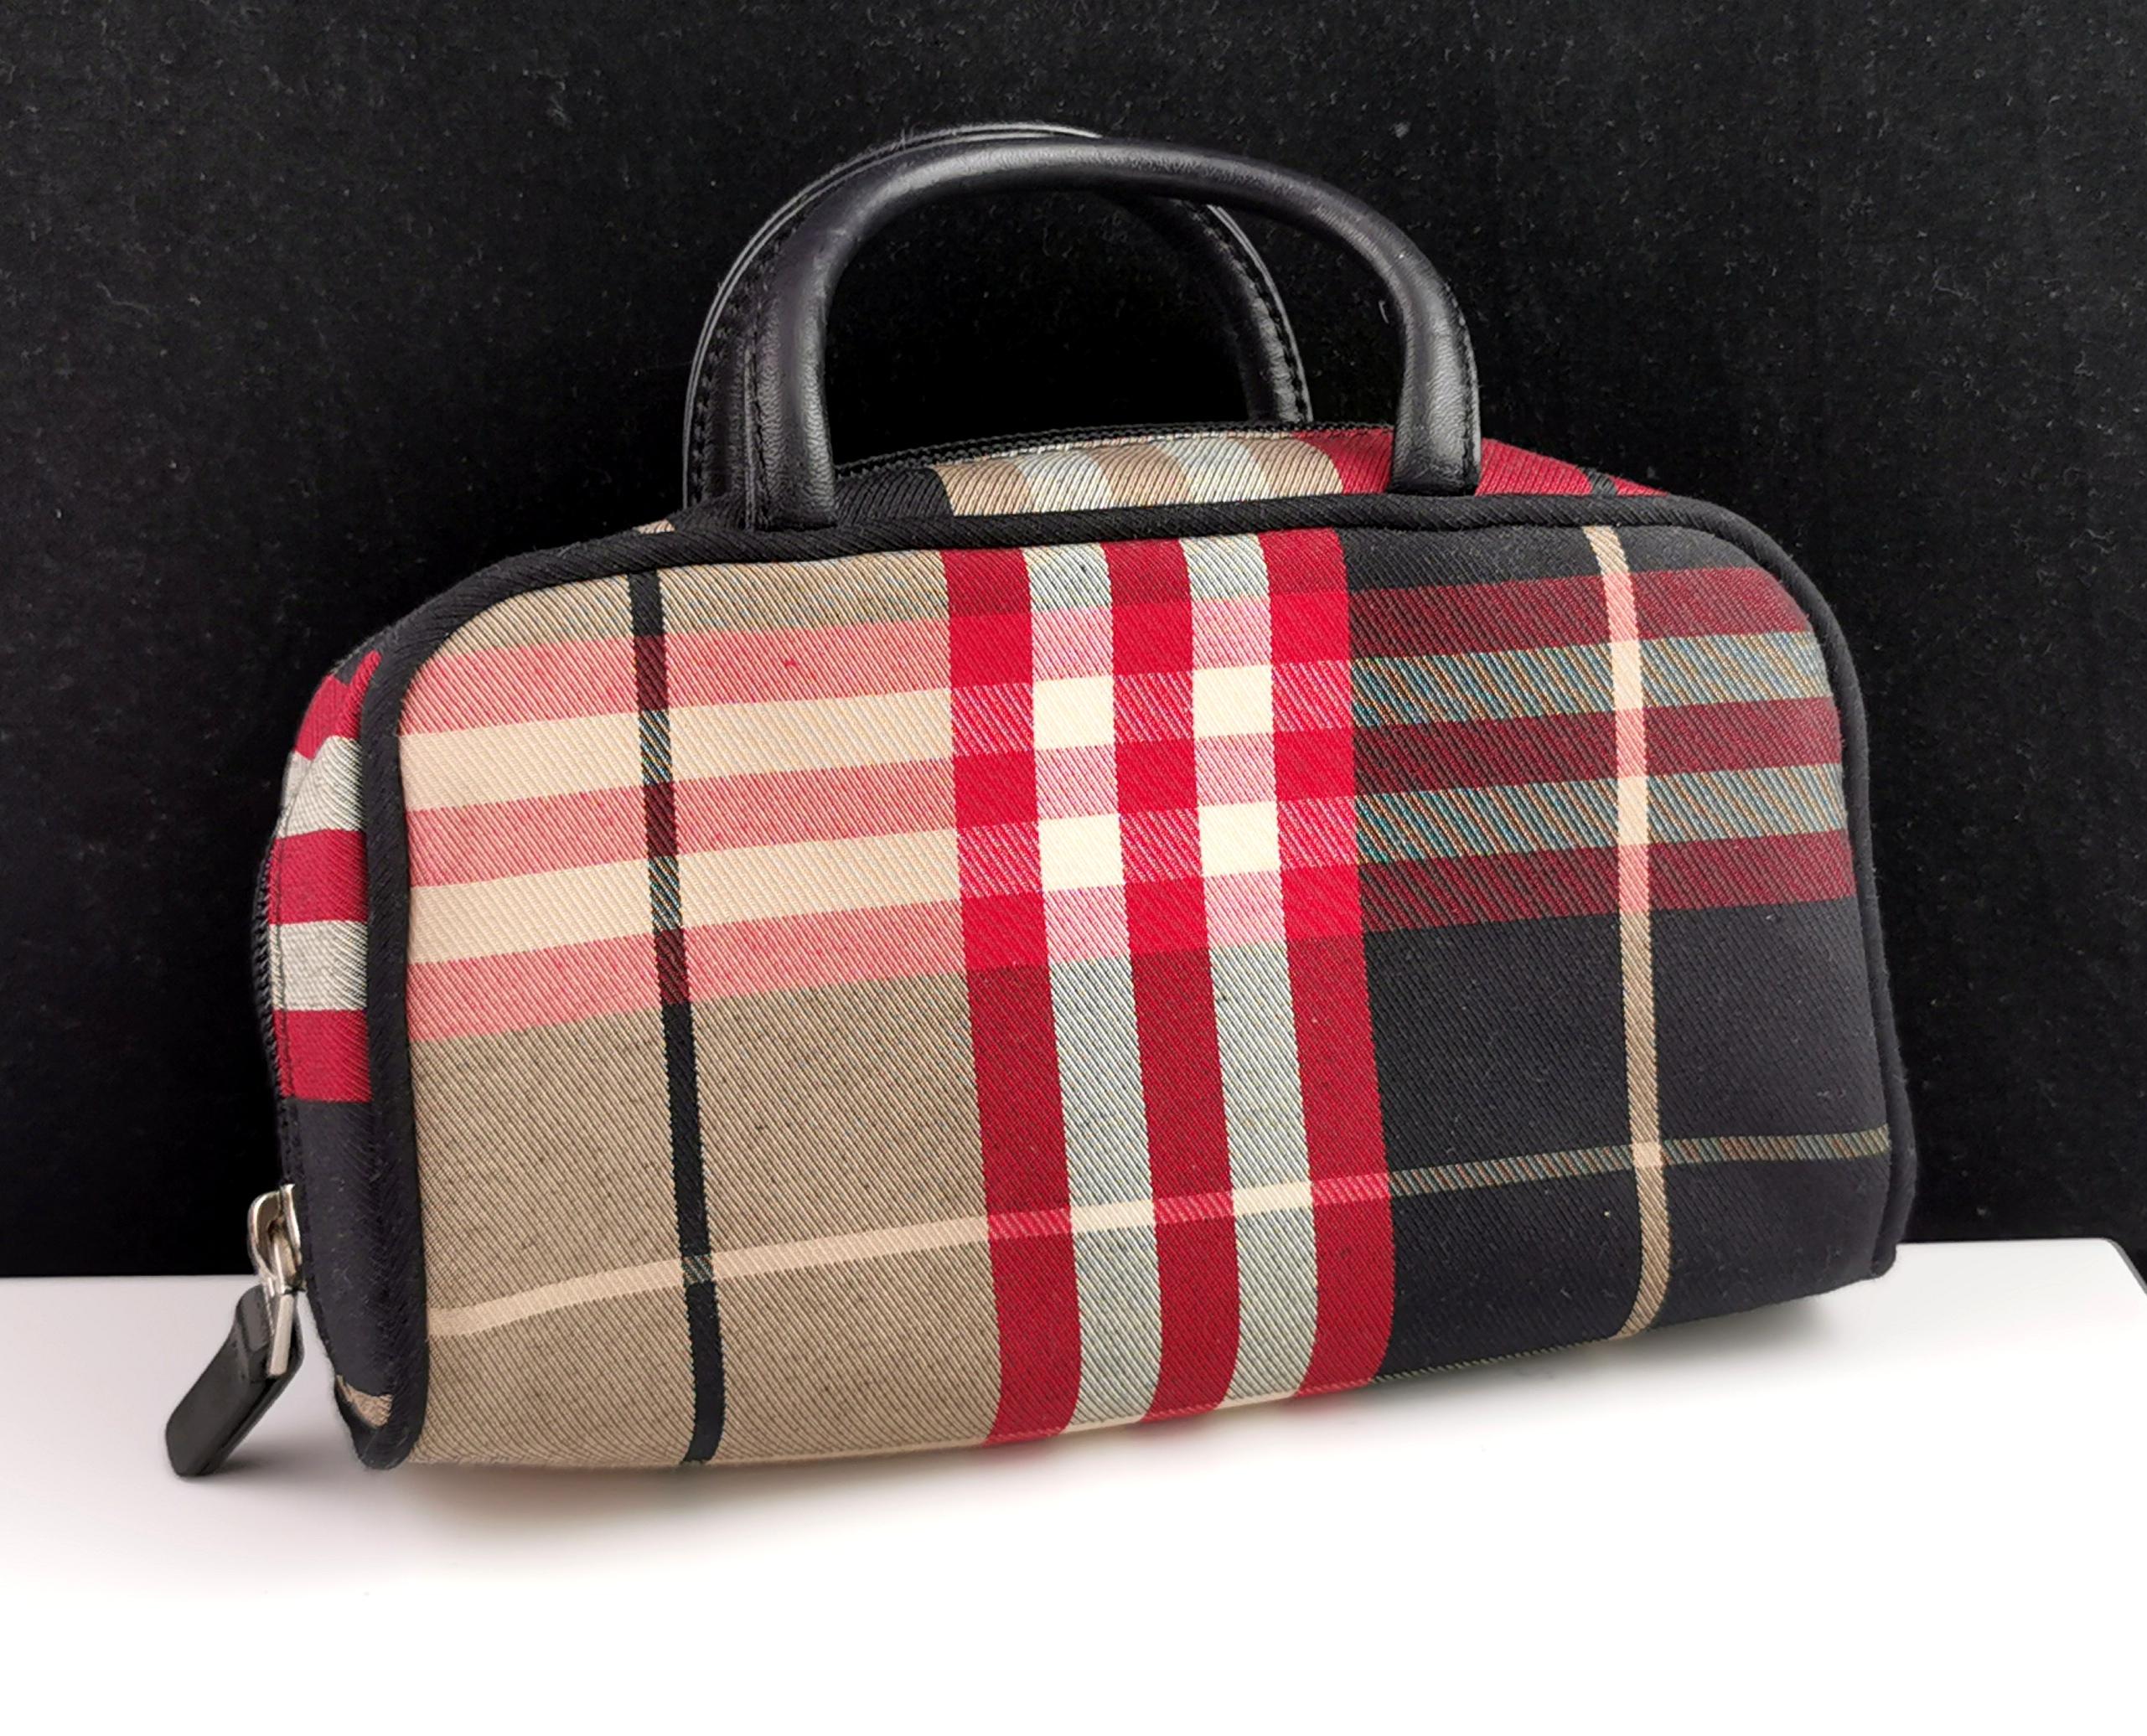 A stylish Burberry mini bowling bag.

It is a very small bag, a cosmetics or toiletries bag in the new style check with black faux leather top handles.

It has a zip fastener with a branded zip and label inside for Burberry London.

Inside there are